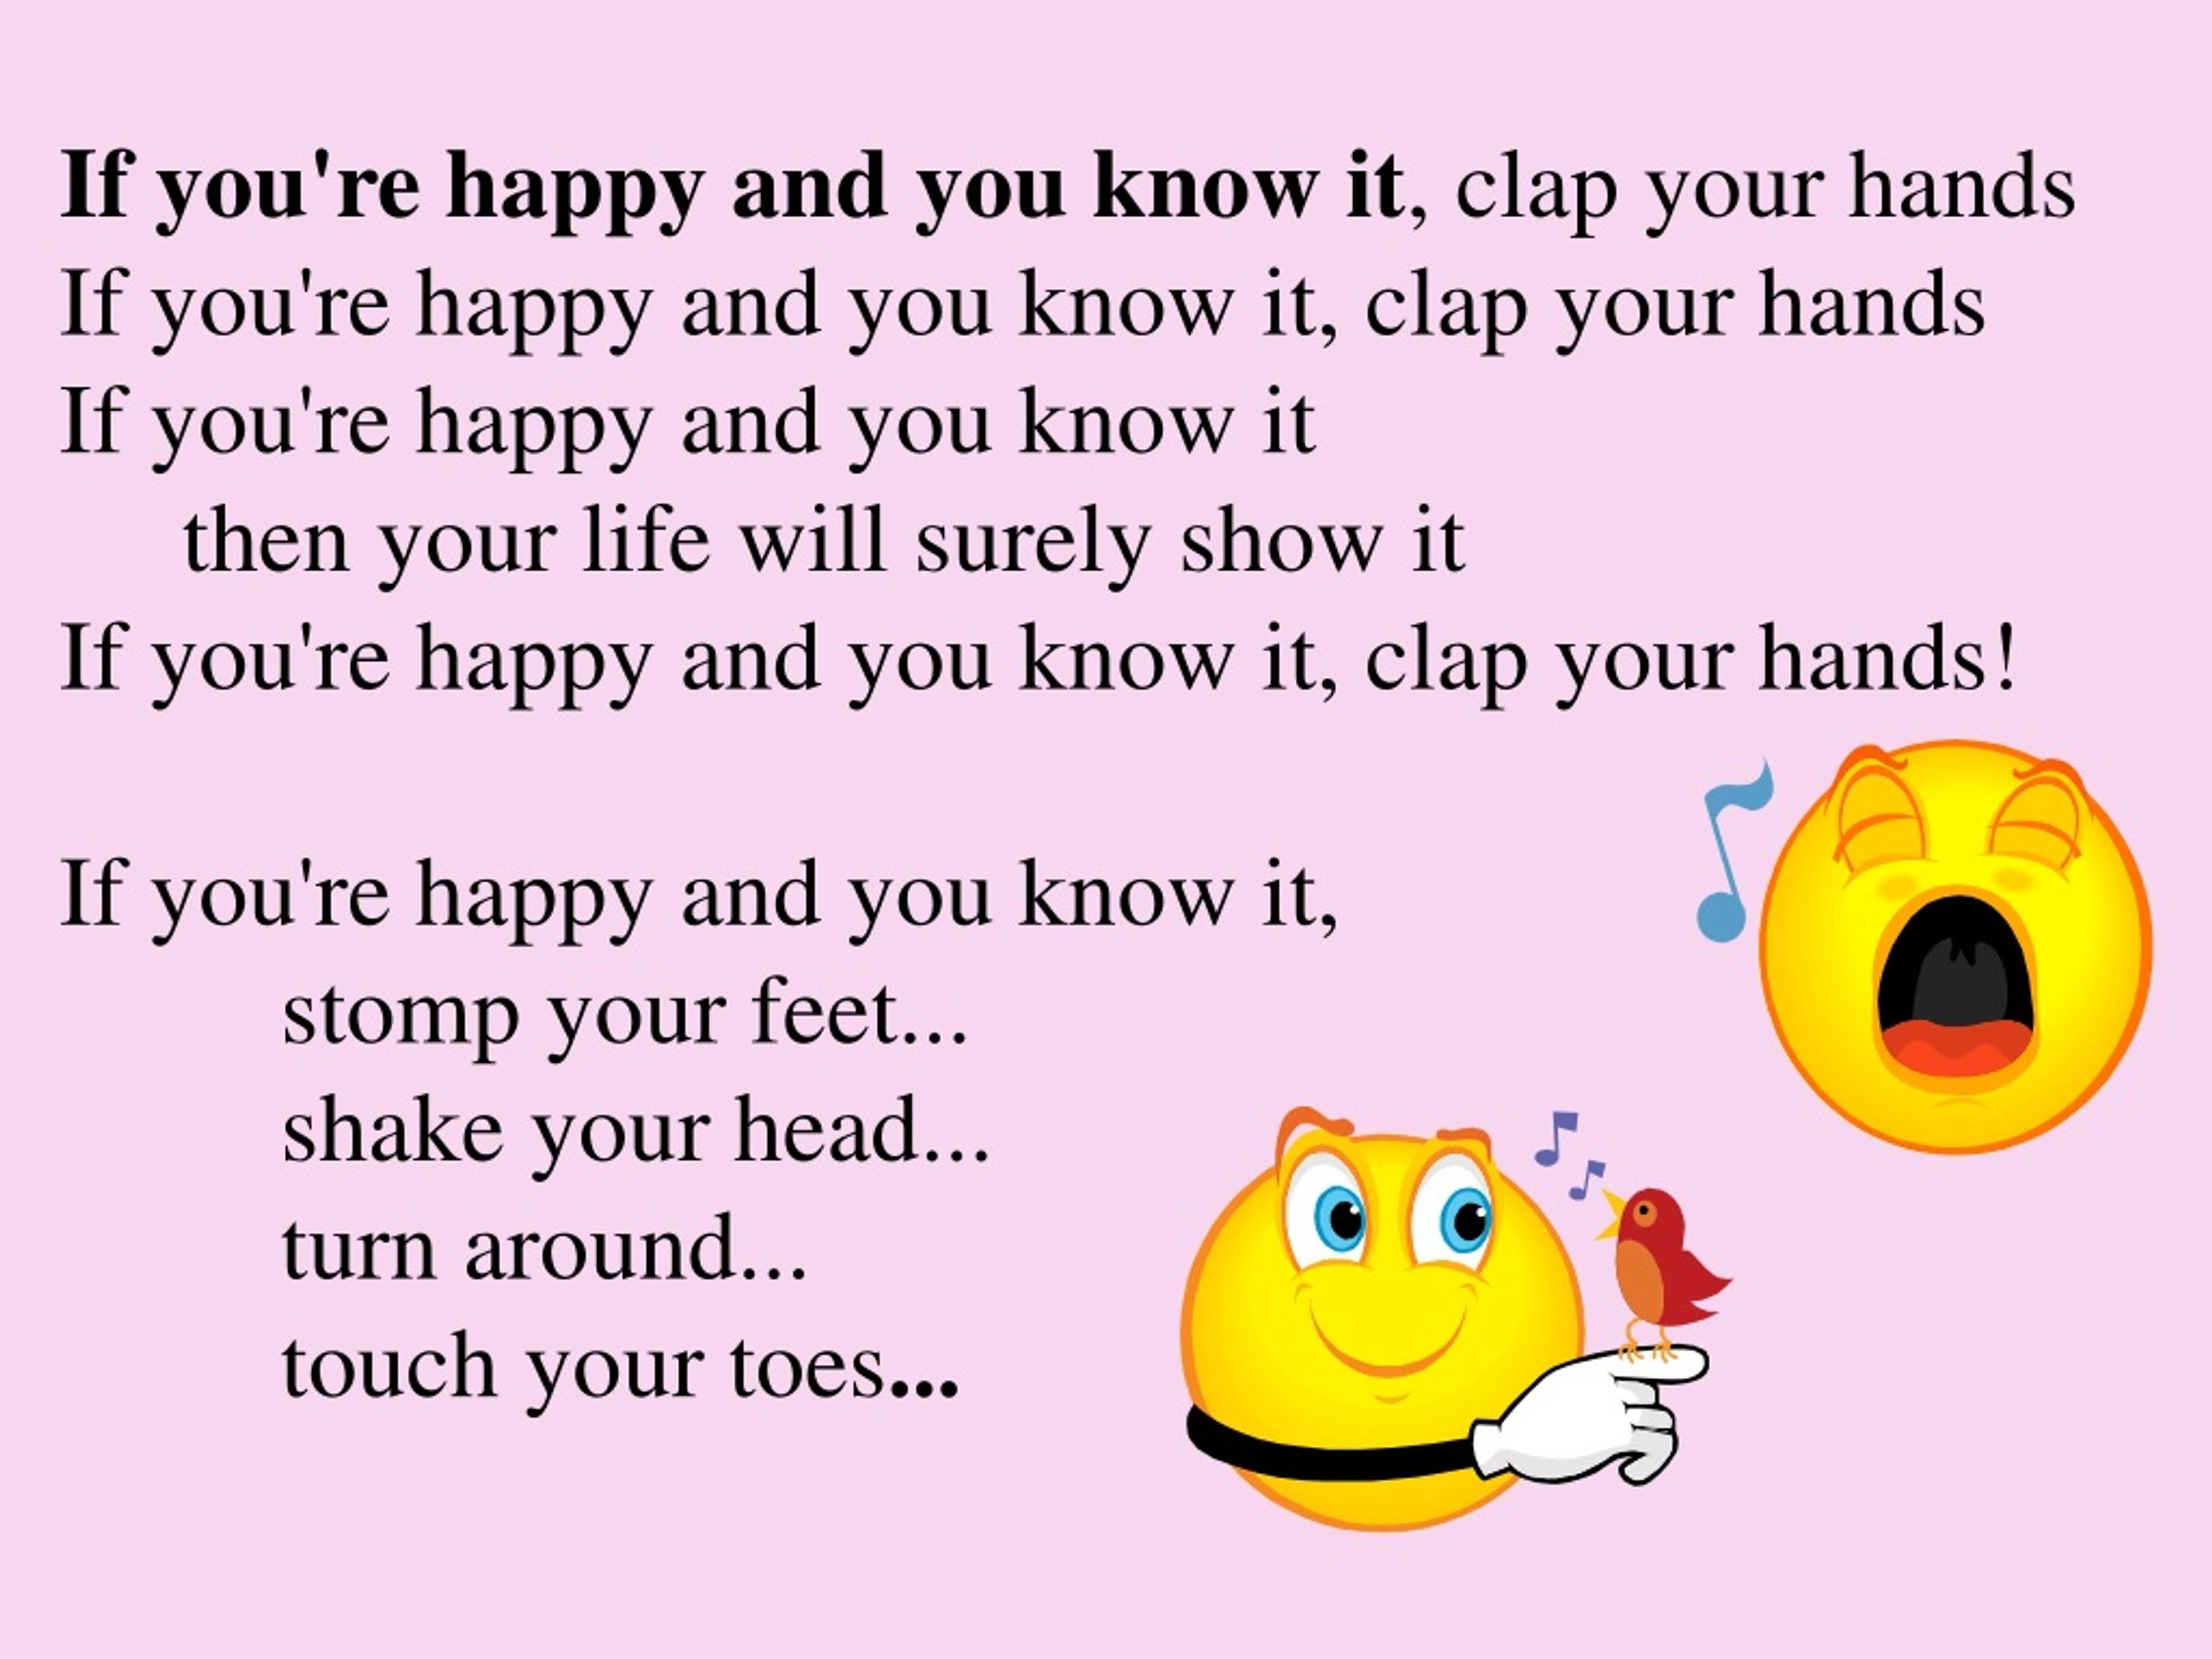 If you are happy clap. If you Happy Clap your hands текст. If you Happy and you know it Clap your hands текст. If you`re Happy and you know it. If you re Happy and you know it текст.